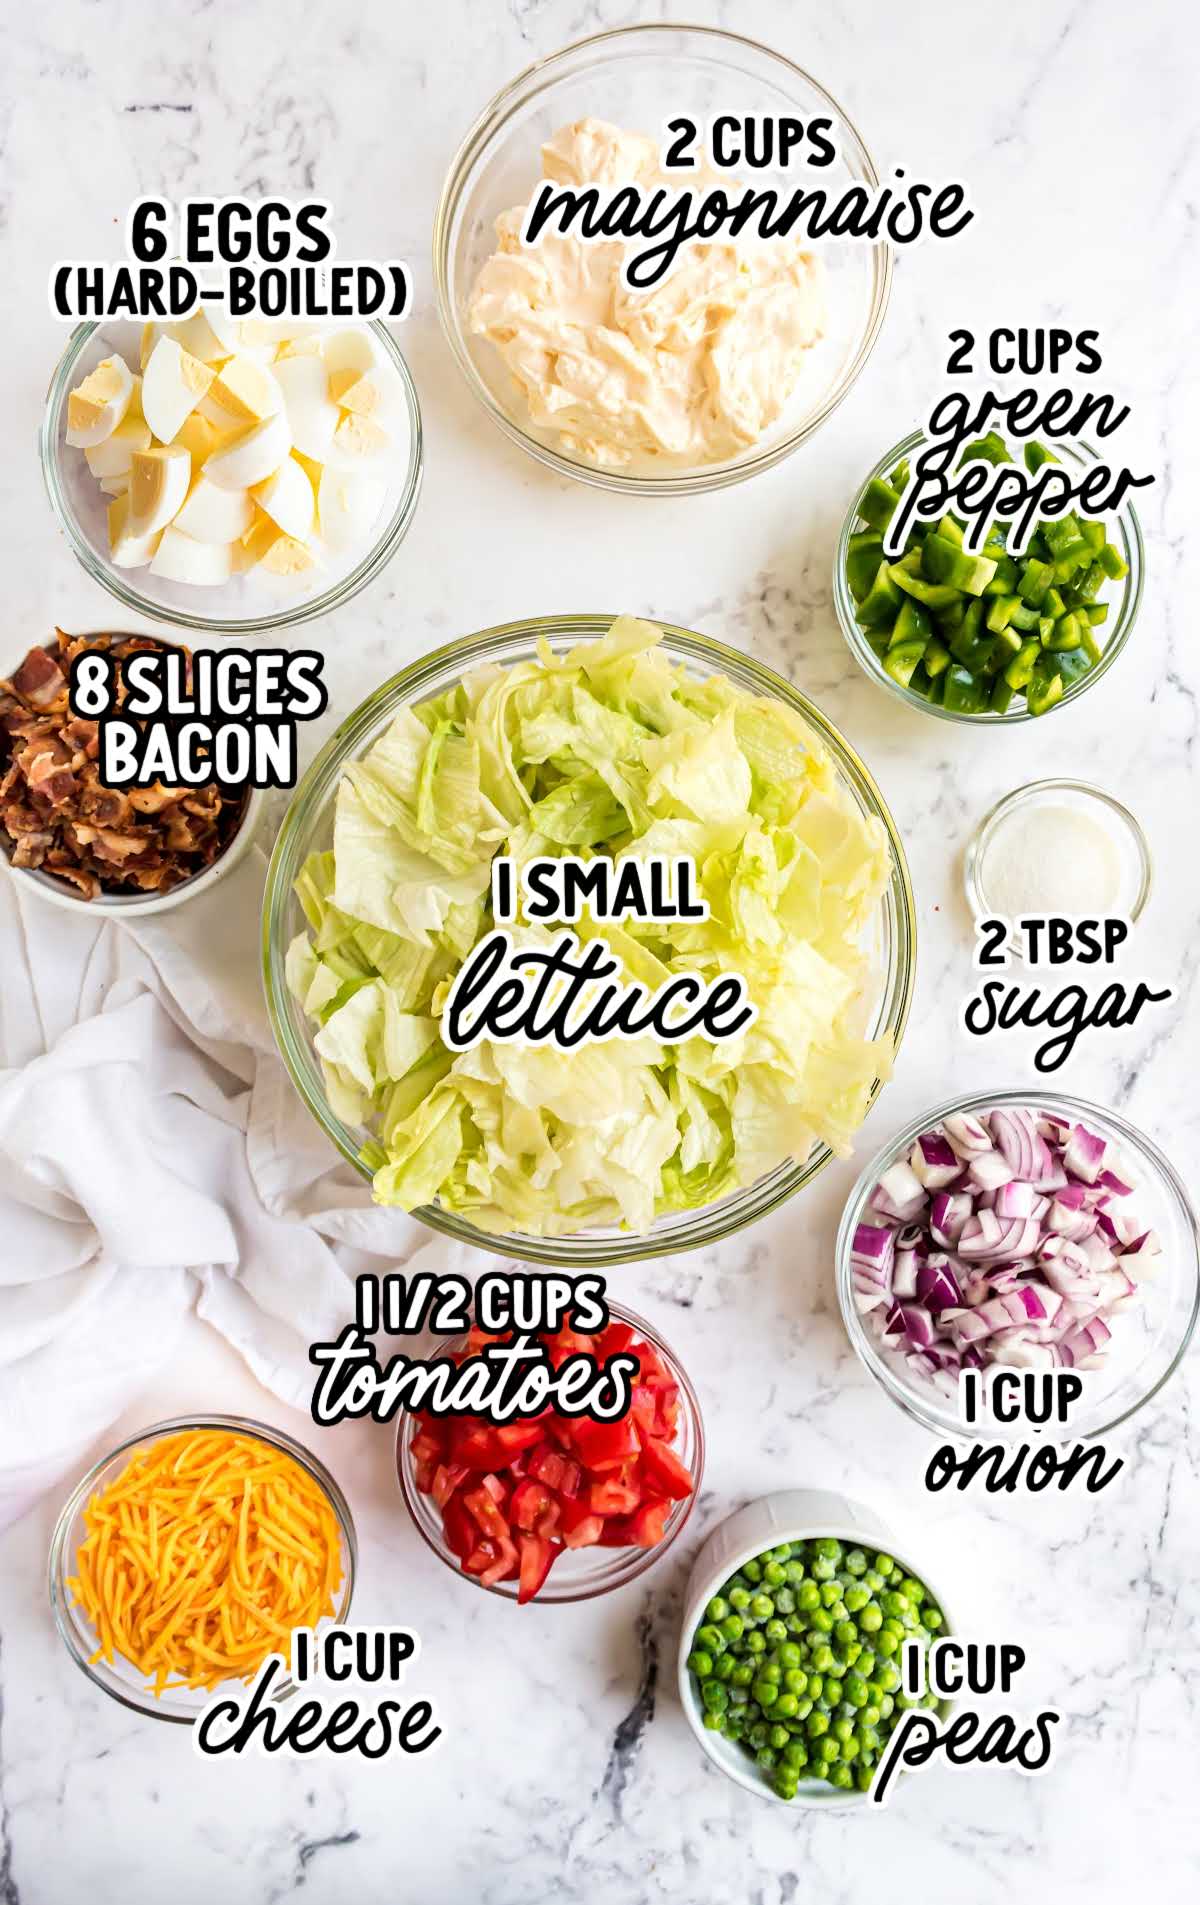 7 Layer Salad raw ingredients that are labeled